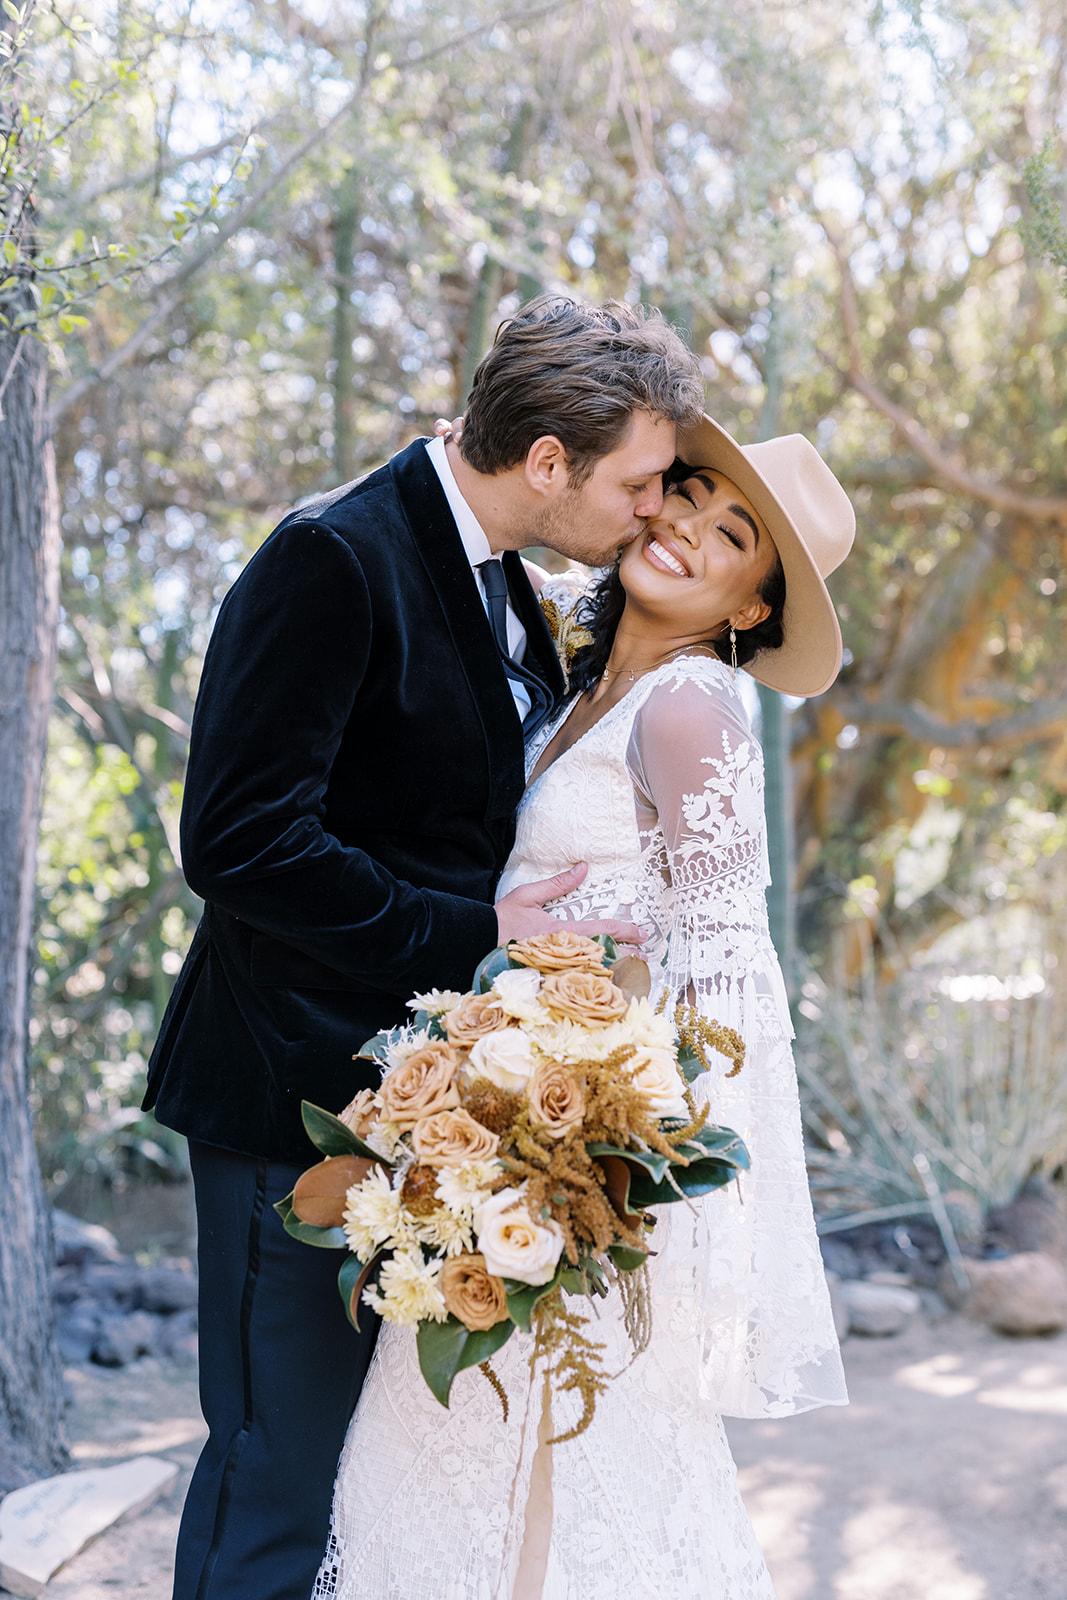 Man kisses woman on cheek while woman smiles. Woman is holding wedding bouquet and is wearing a white lace wedding dress that gives off boho vibes. Desert elopement photos. Elopement photographer in Texas